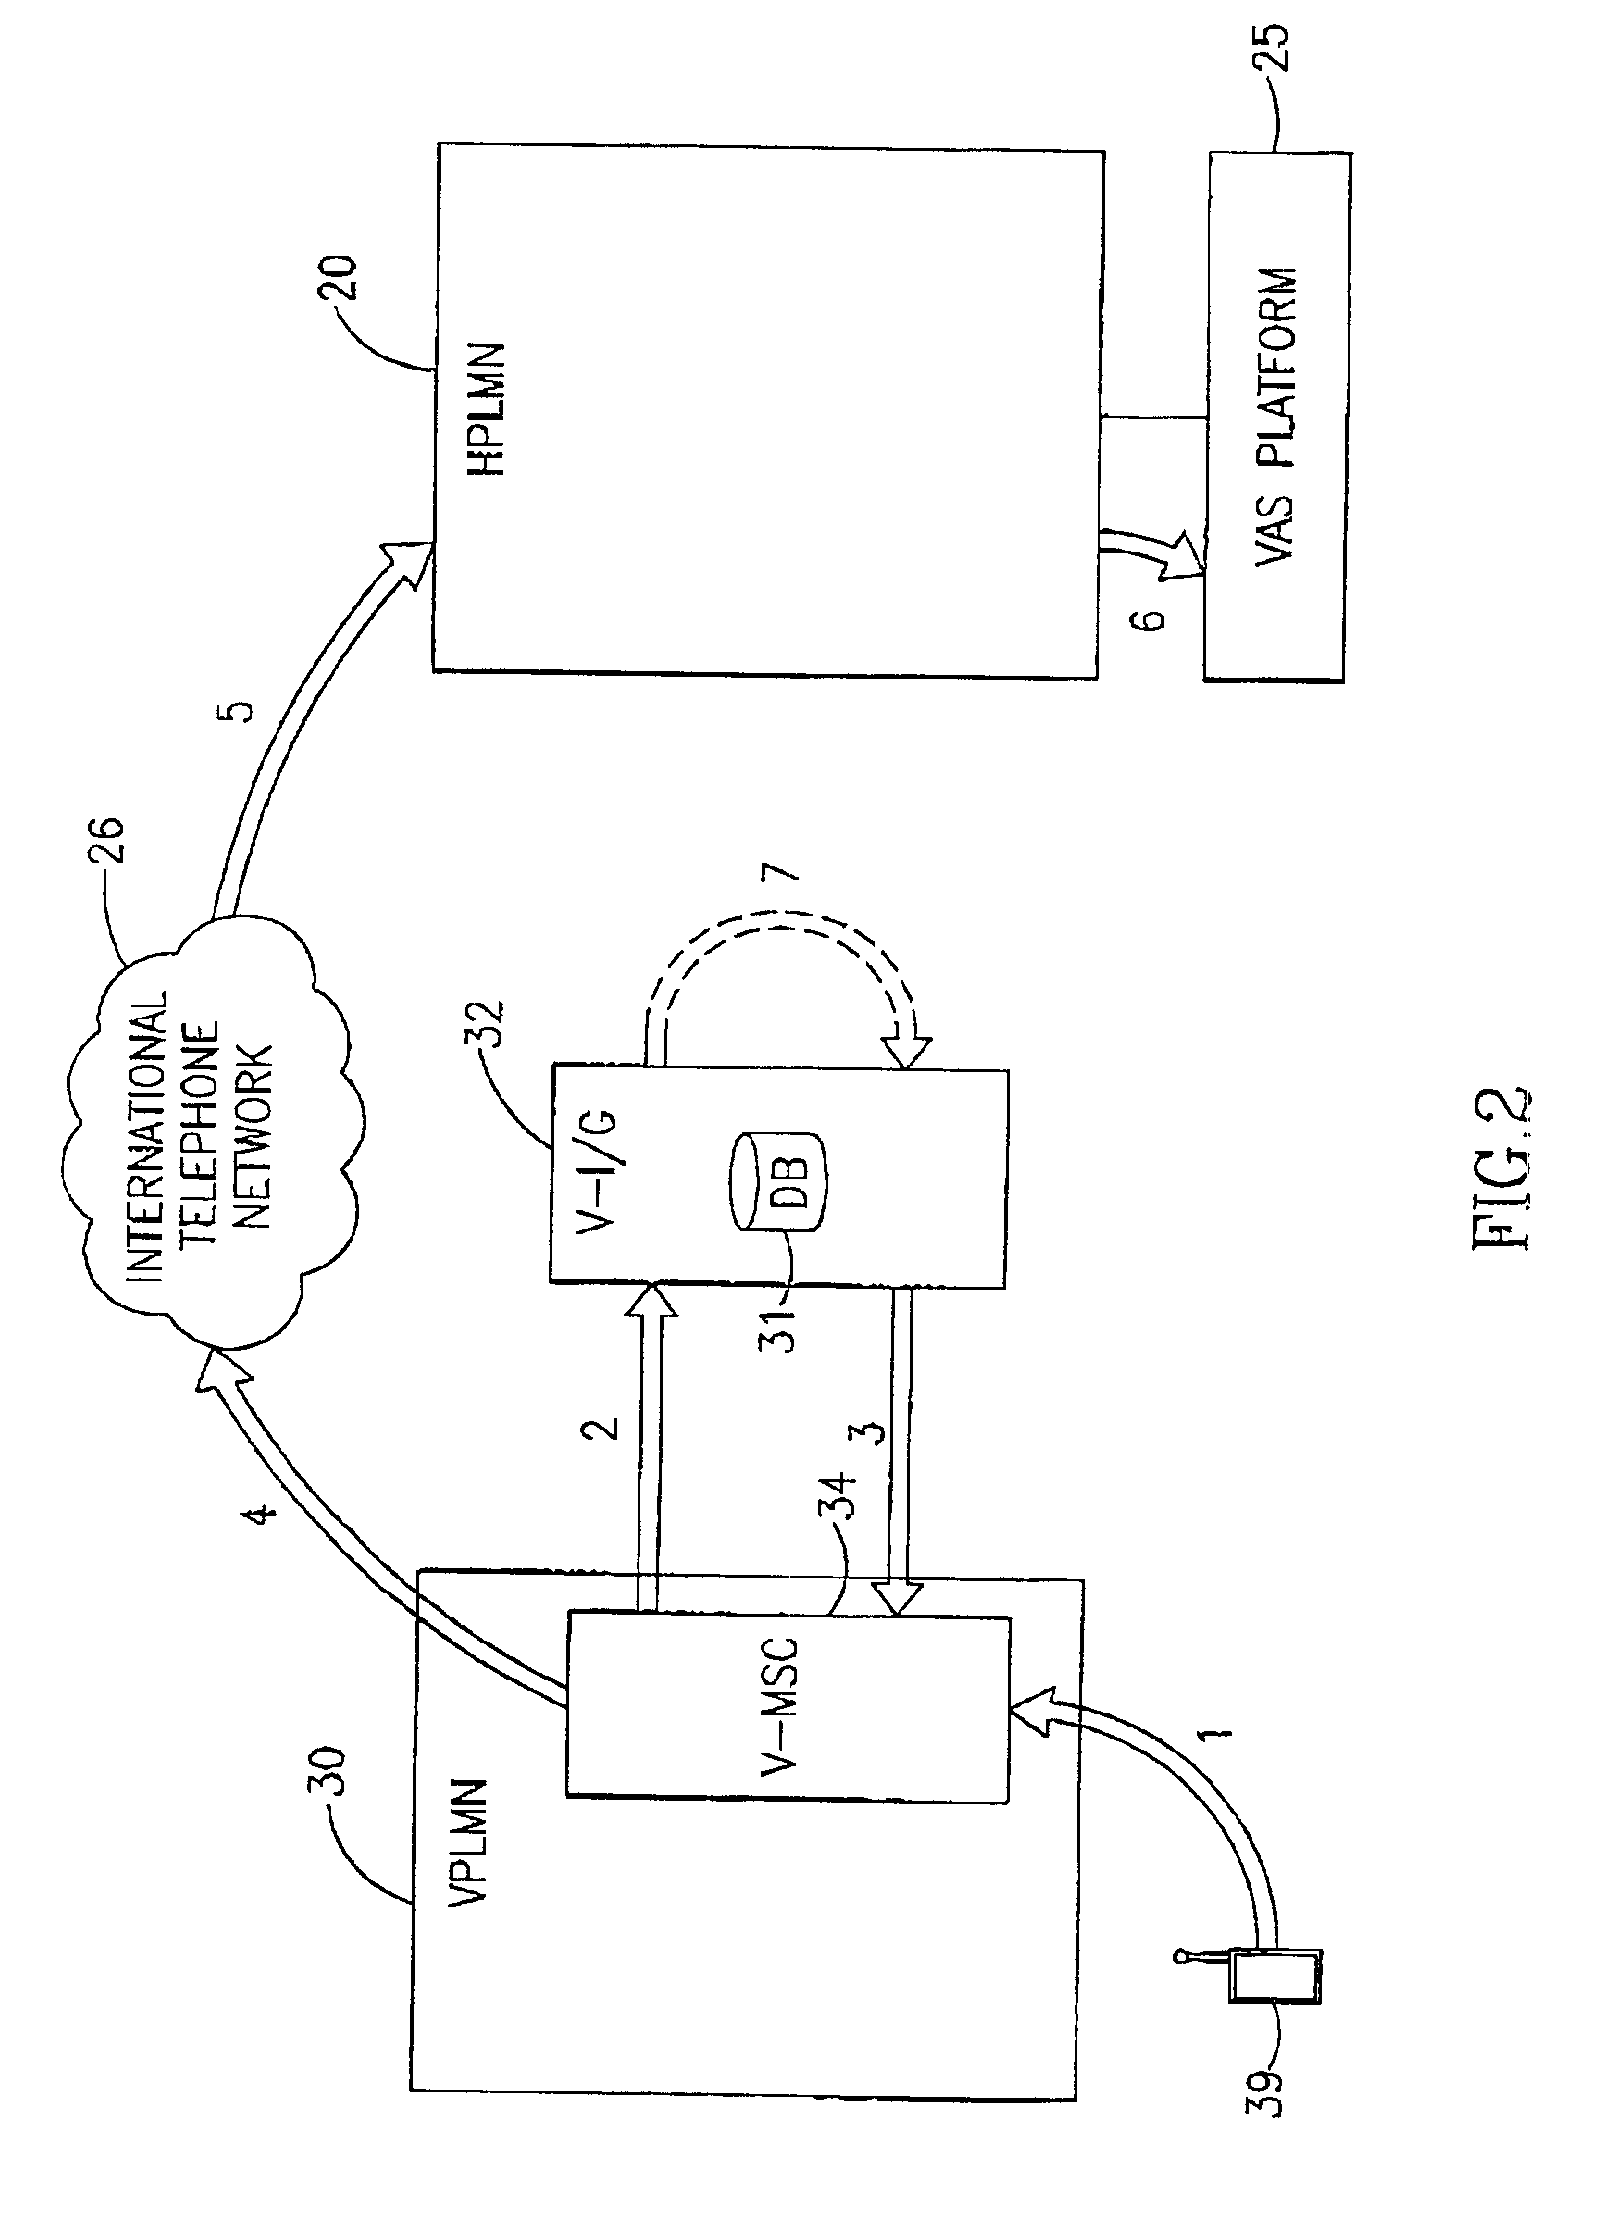 System and methods for global access to services for mobile telephone subscribers